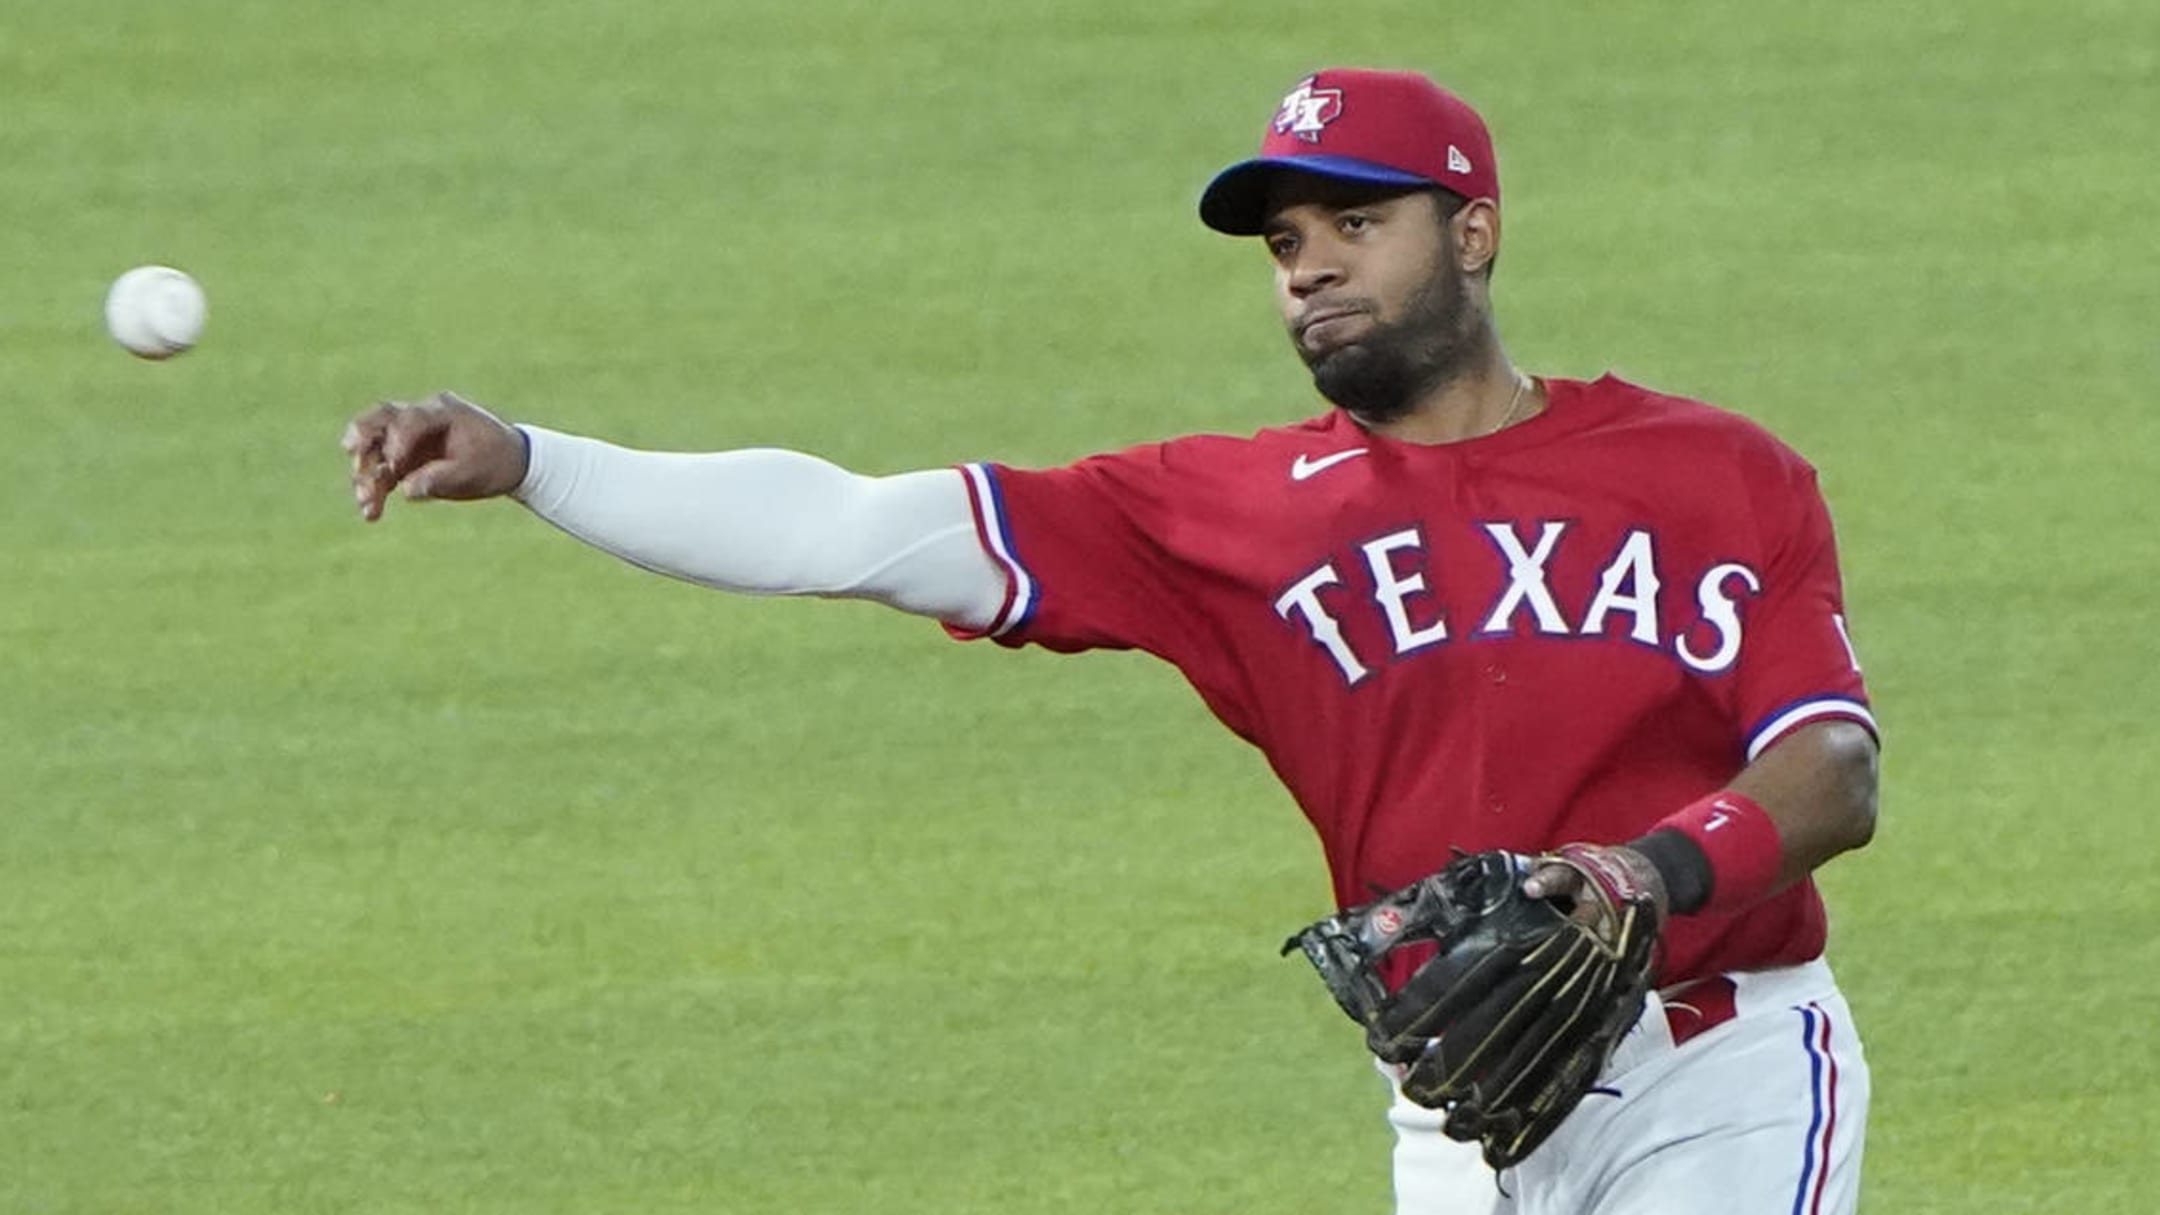 A's acquire Elvis Andrus from Rangers for Khris Davis